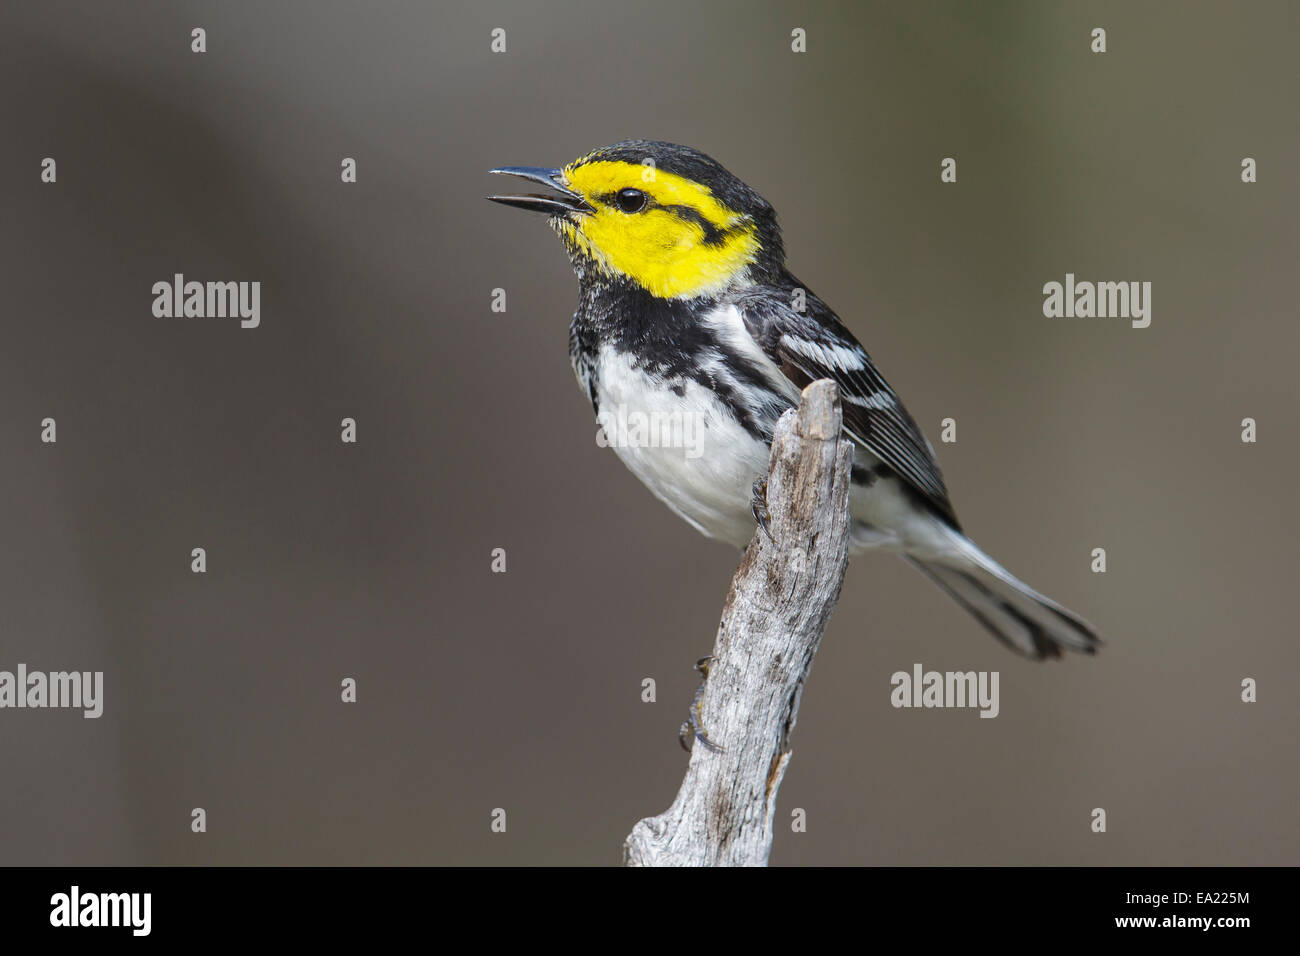 Golden-cheeked Warbler - Dendroica chrysoparia - male Stock Photo